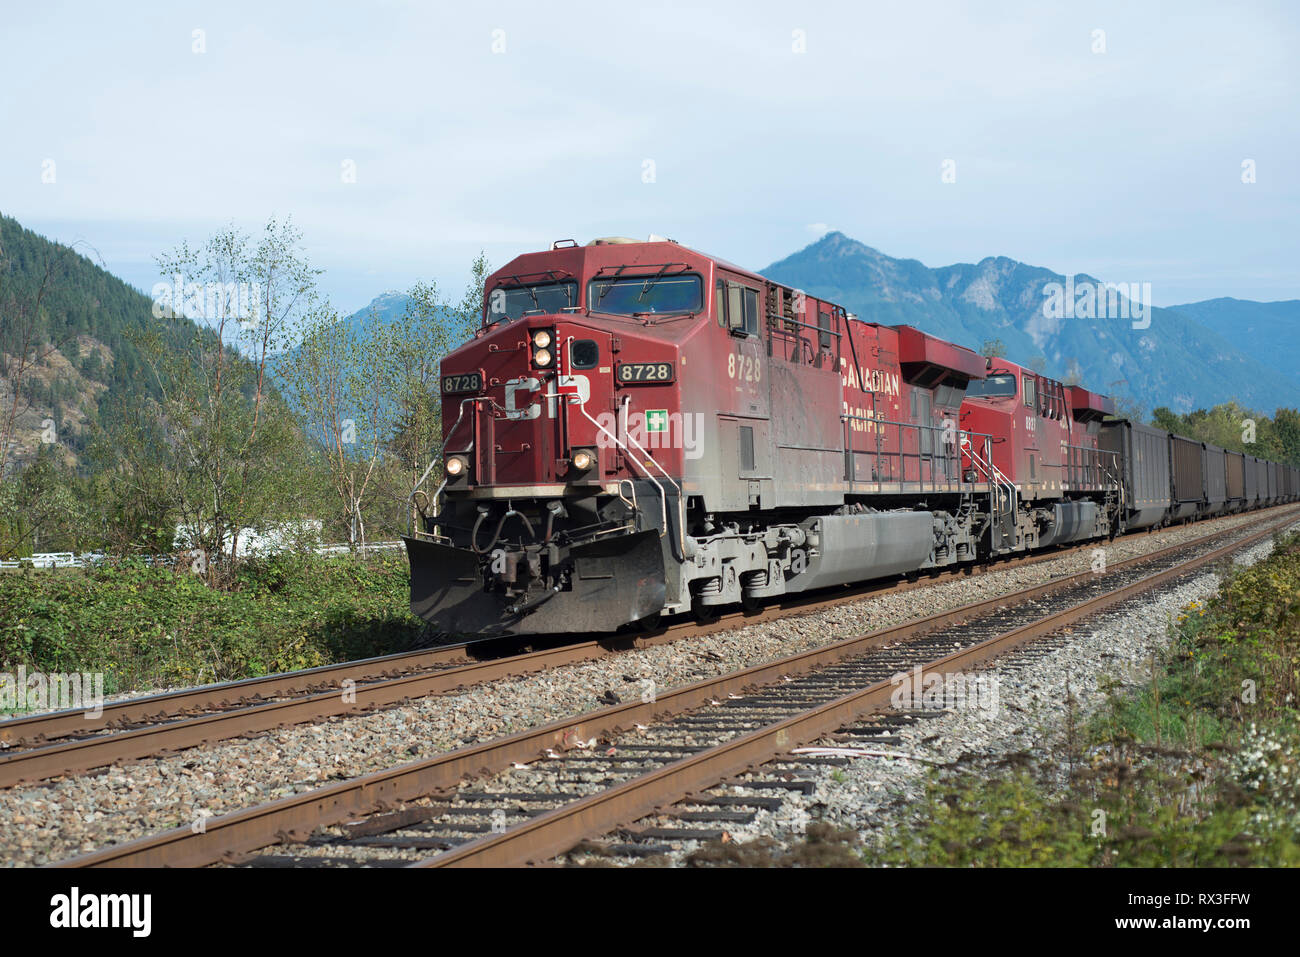 A CP (Canadian Pacific) train carries loads of coal near Hope, BC, Canada Stock Photo